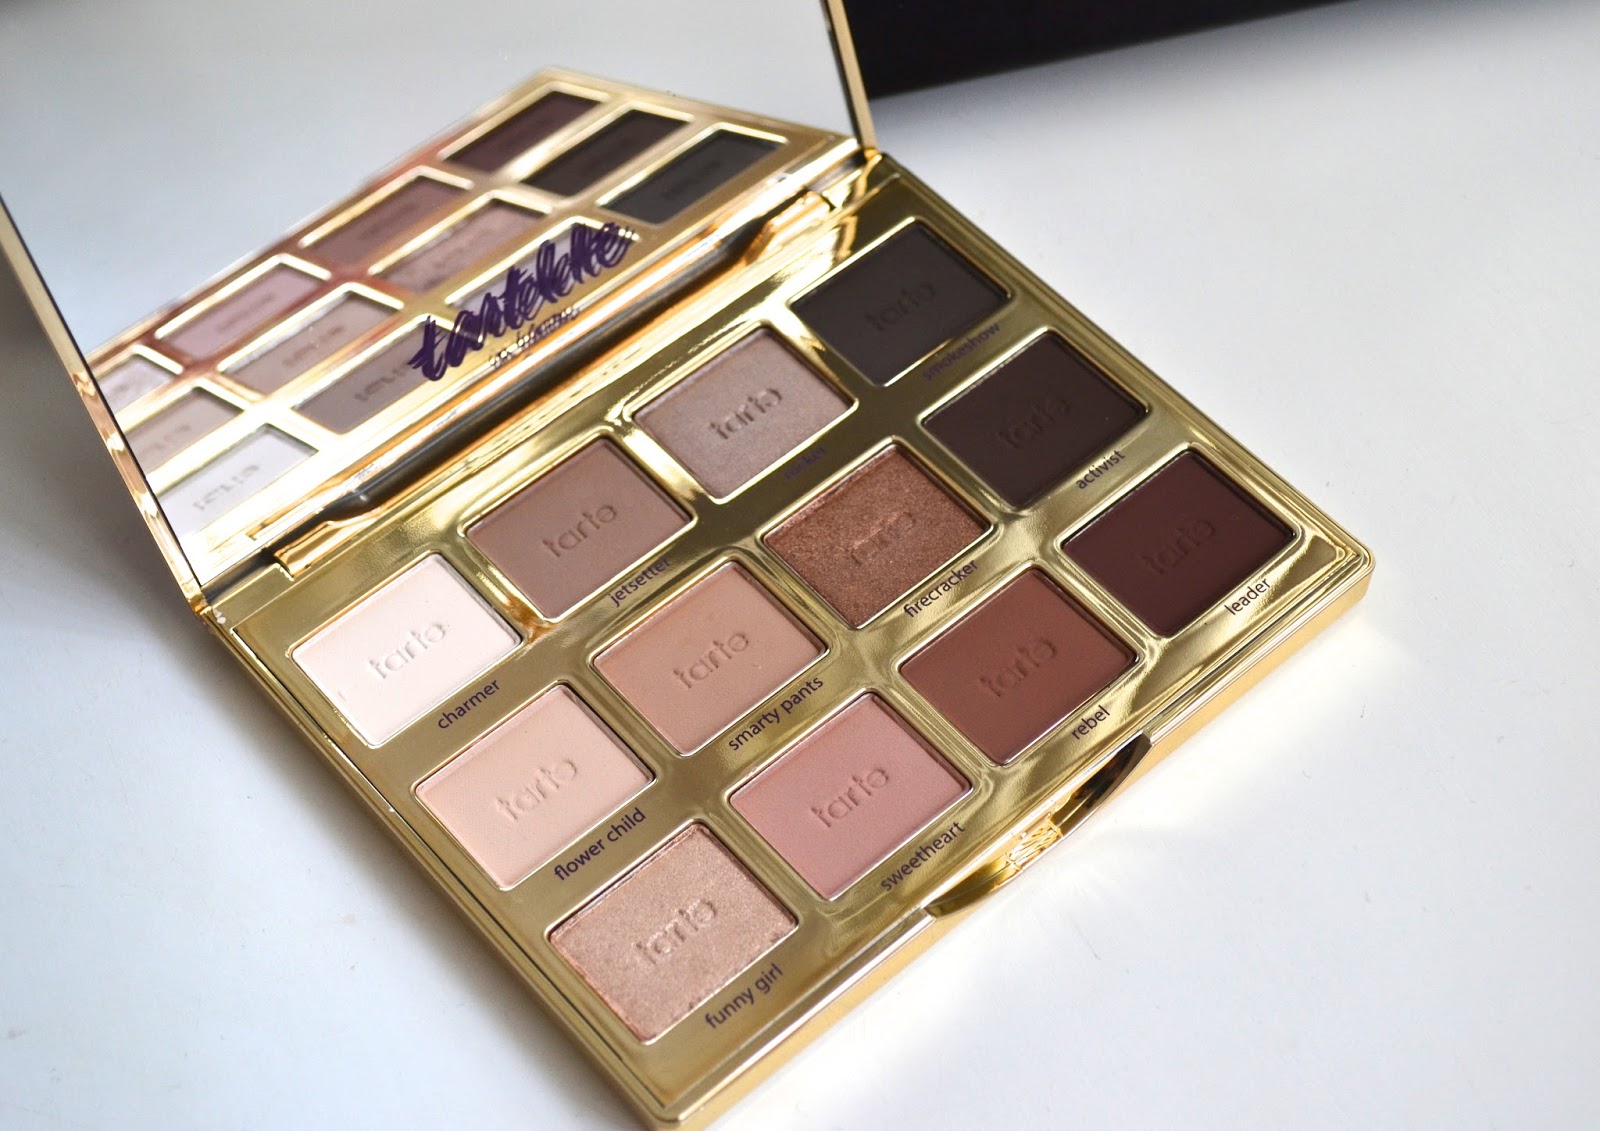 Aquaheart: Tarte Tartelette In Bloom Clay Palette - Swatches and Review